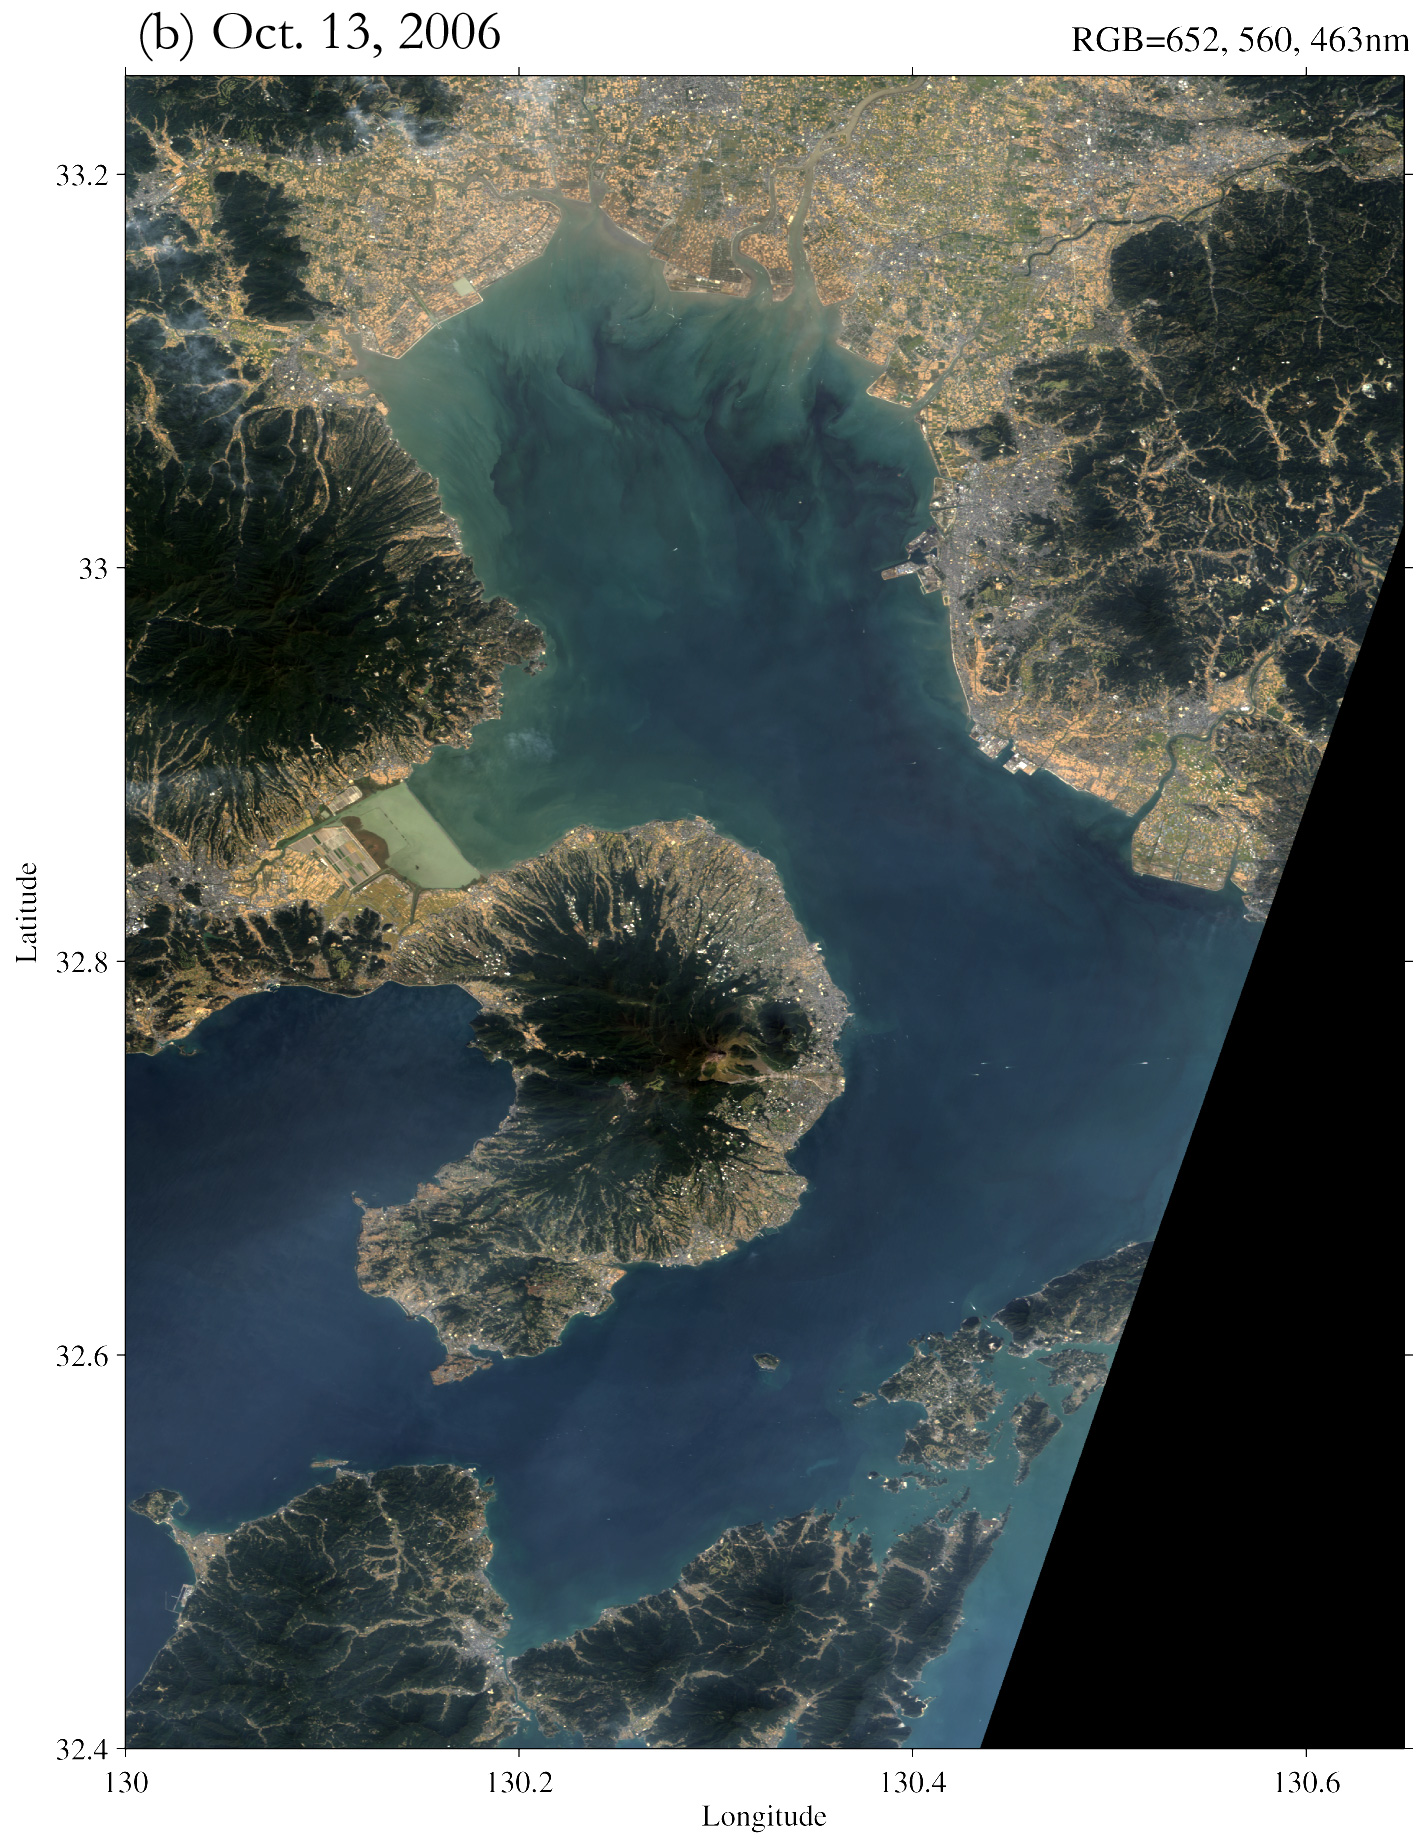 Fig.1: RGB images of the Ariake Sea on Oct. 13 in 2006 by AVNIR-2